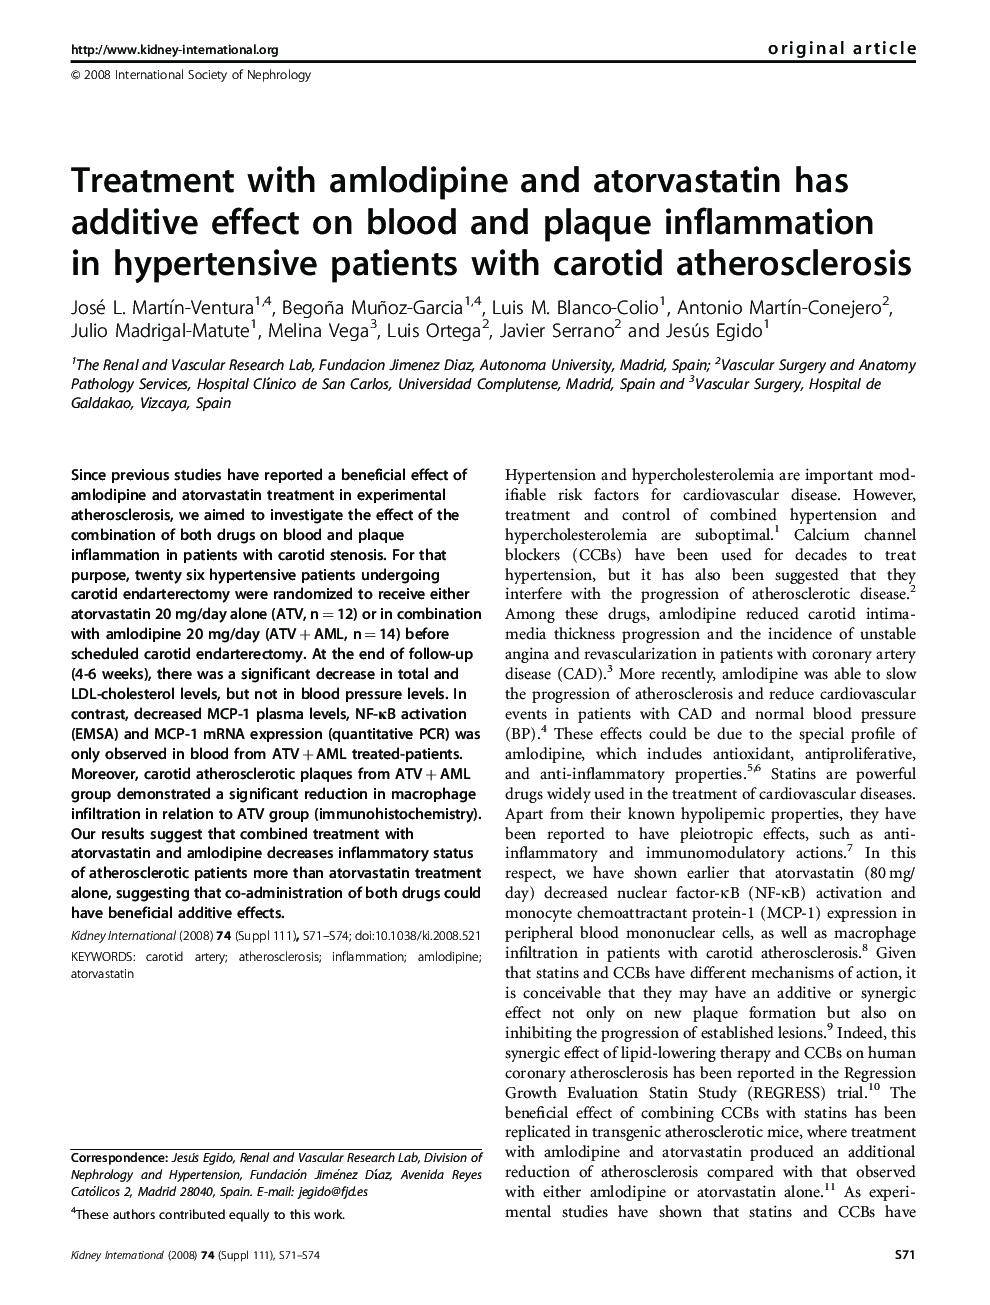 Treatment with amlodipine and atorvastatin has additive effect on blood and plaque inflammation in hypertensive patients with carotid atherosclerosis